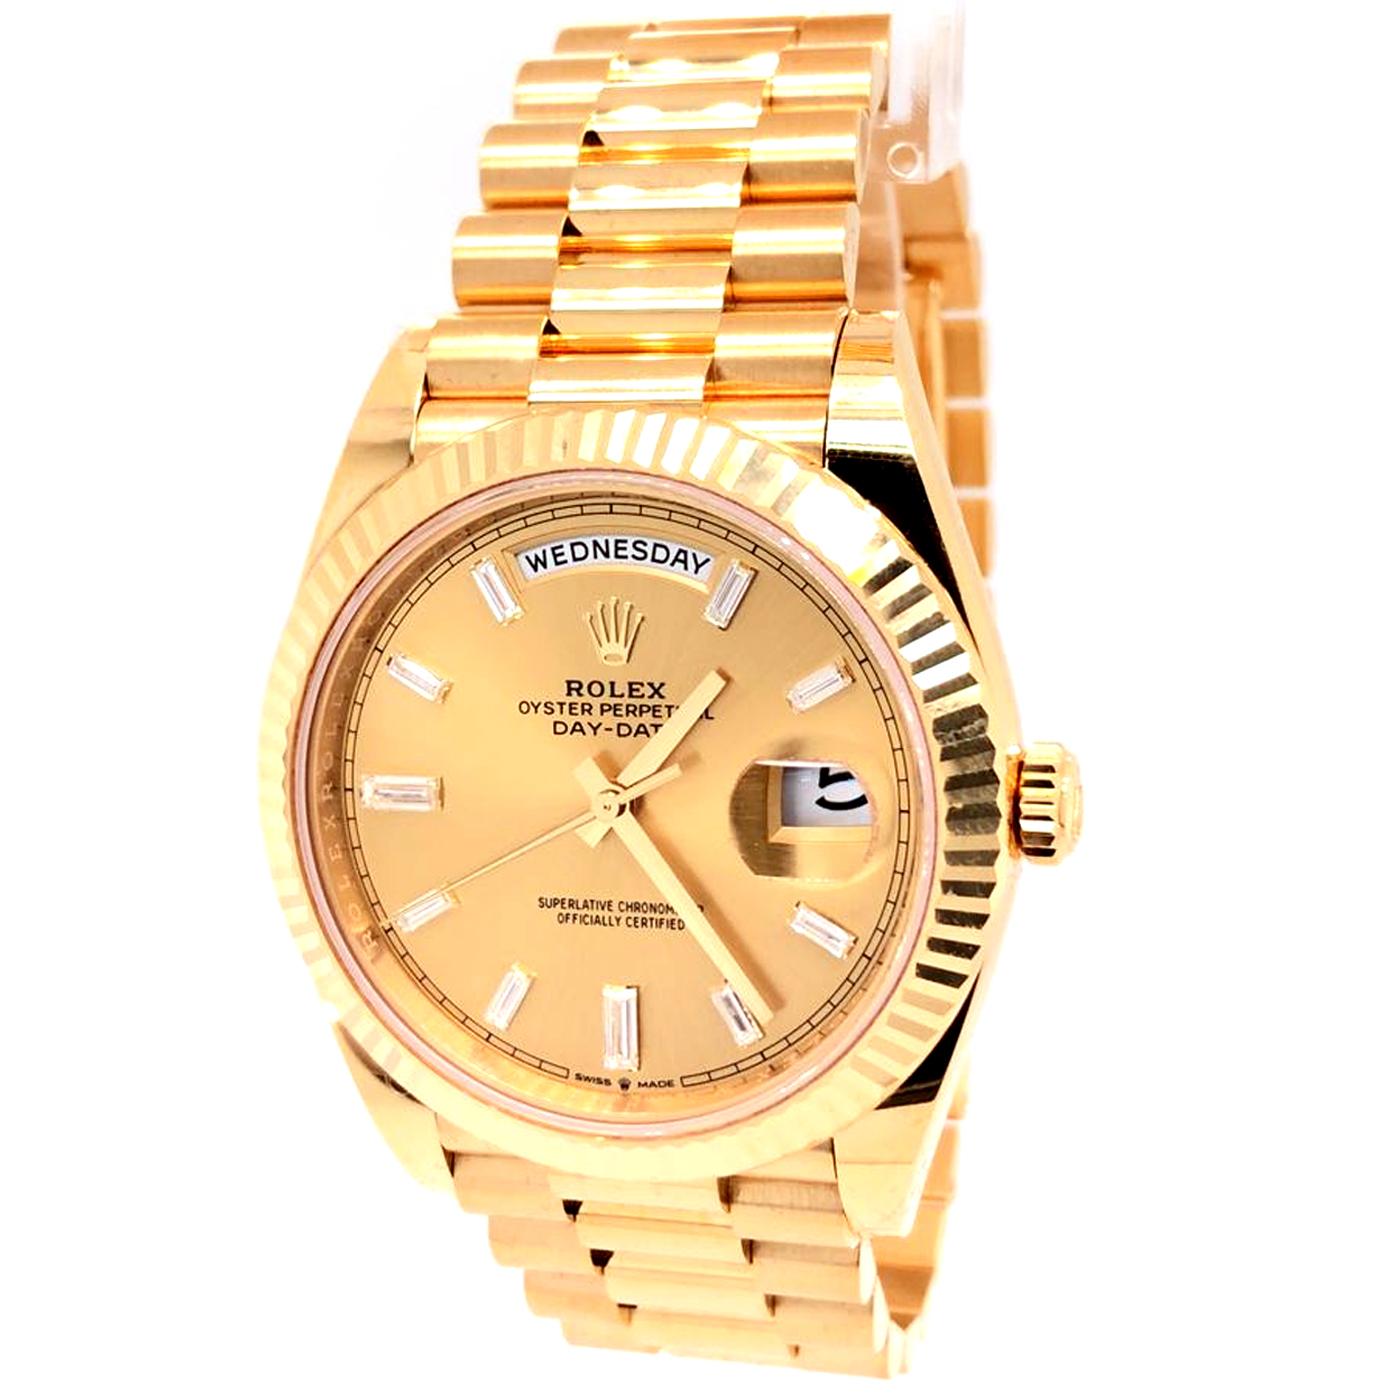 Rolex Day-Date 40mm 18K yellow gold case, screw-down back with Rolex fluting, screw-down crown with twin lock double waterproofness system, fluted bezel, scratch-resistant double anti-reflective sapphire crystal with cyclops lens over the date,